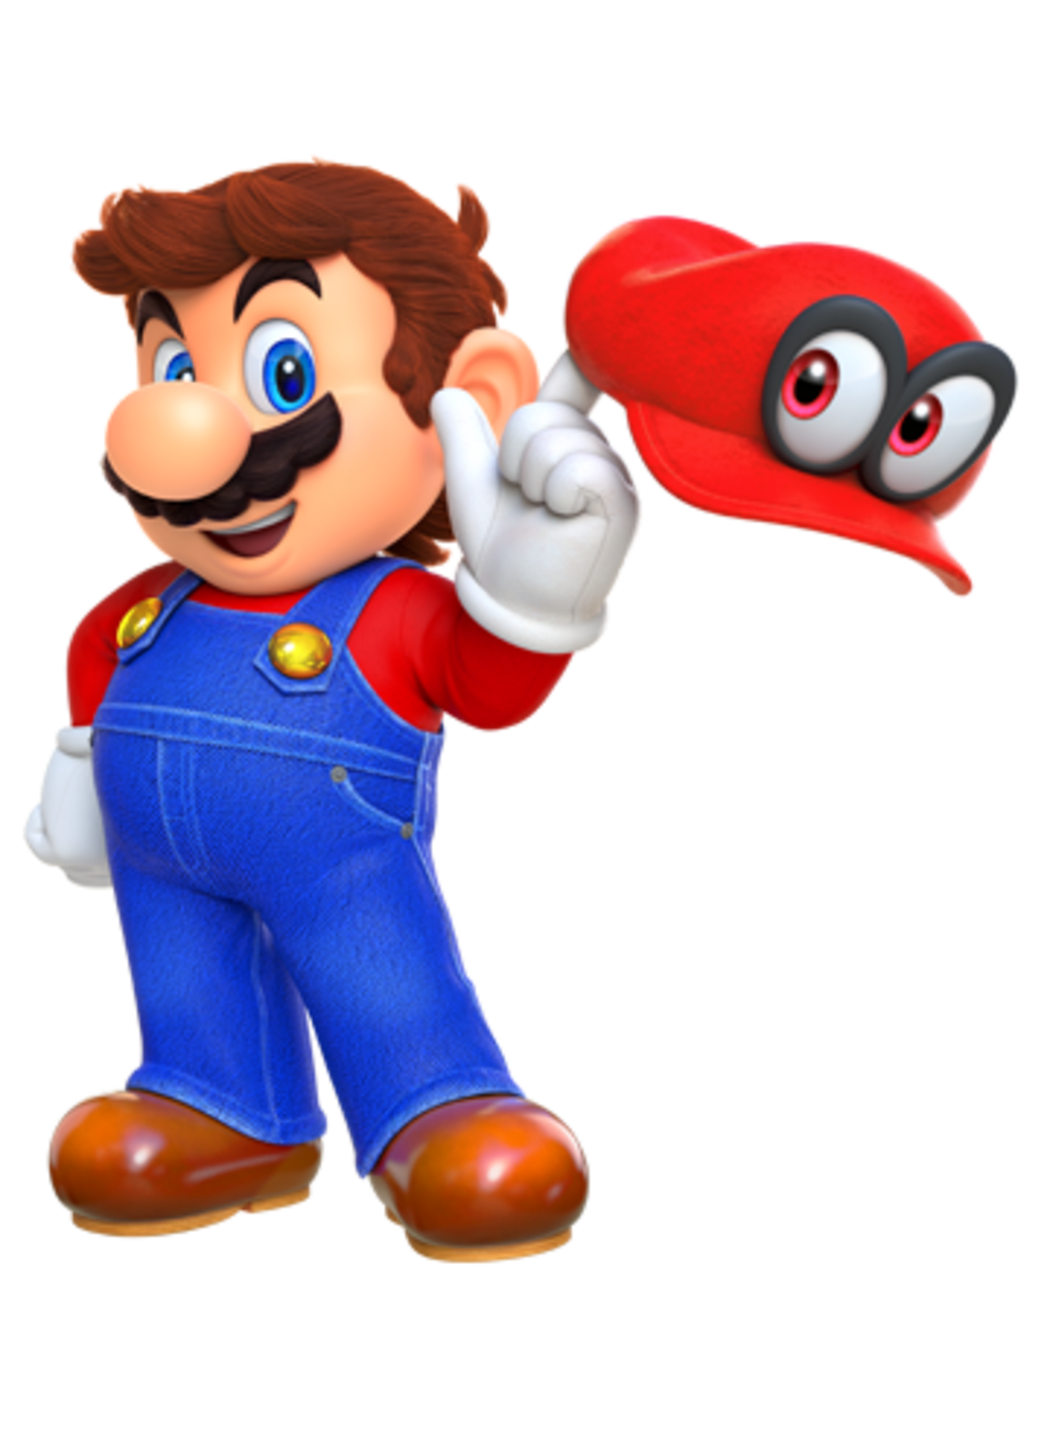 Transplant In time parity Super Mario Odyssey for Nintendo Switch - Nintendo Official Site